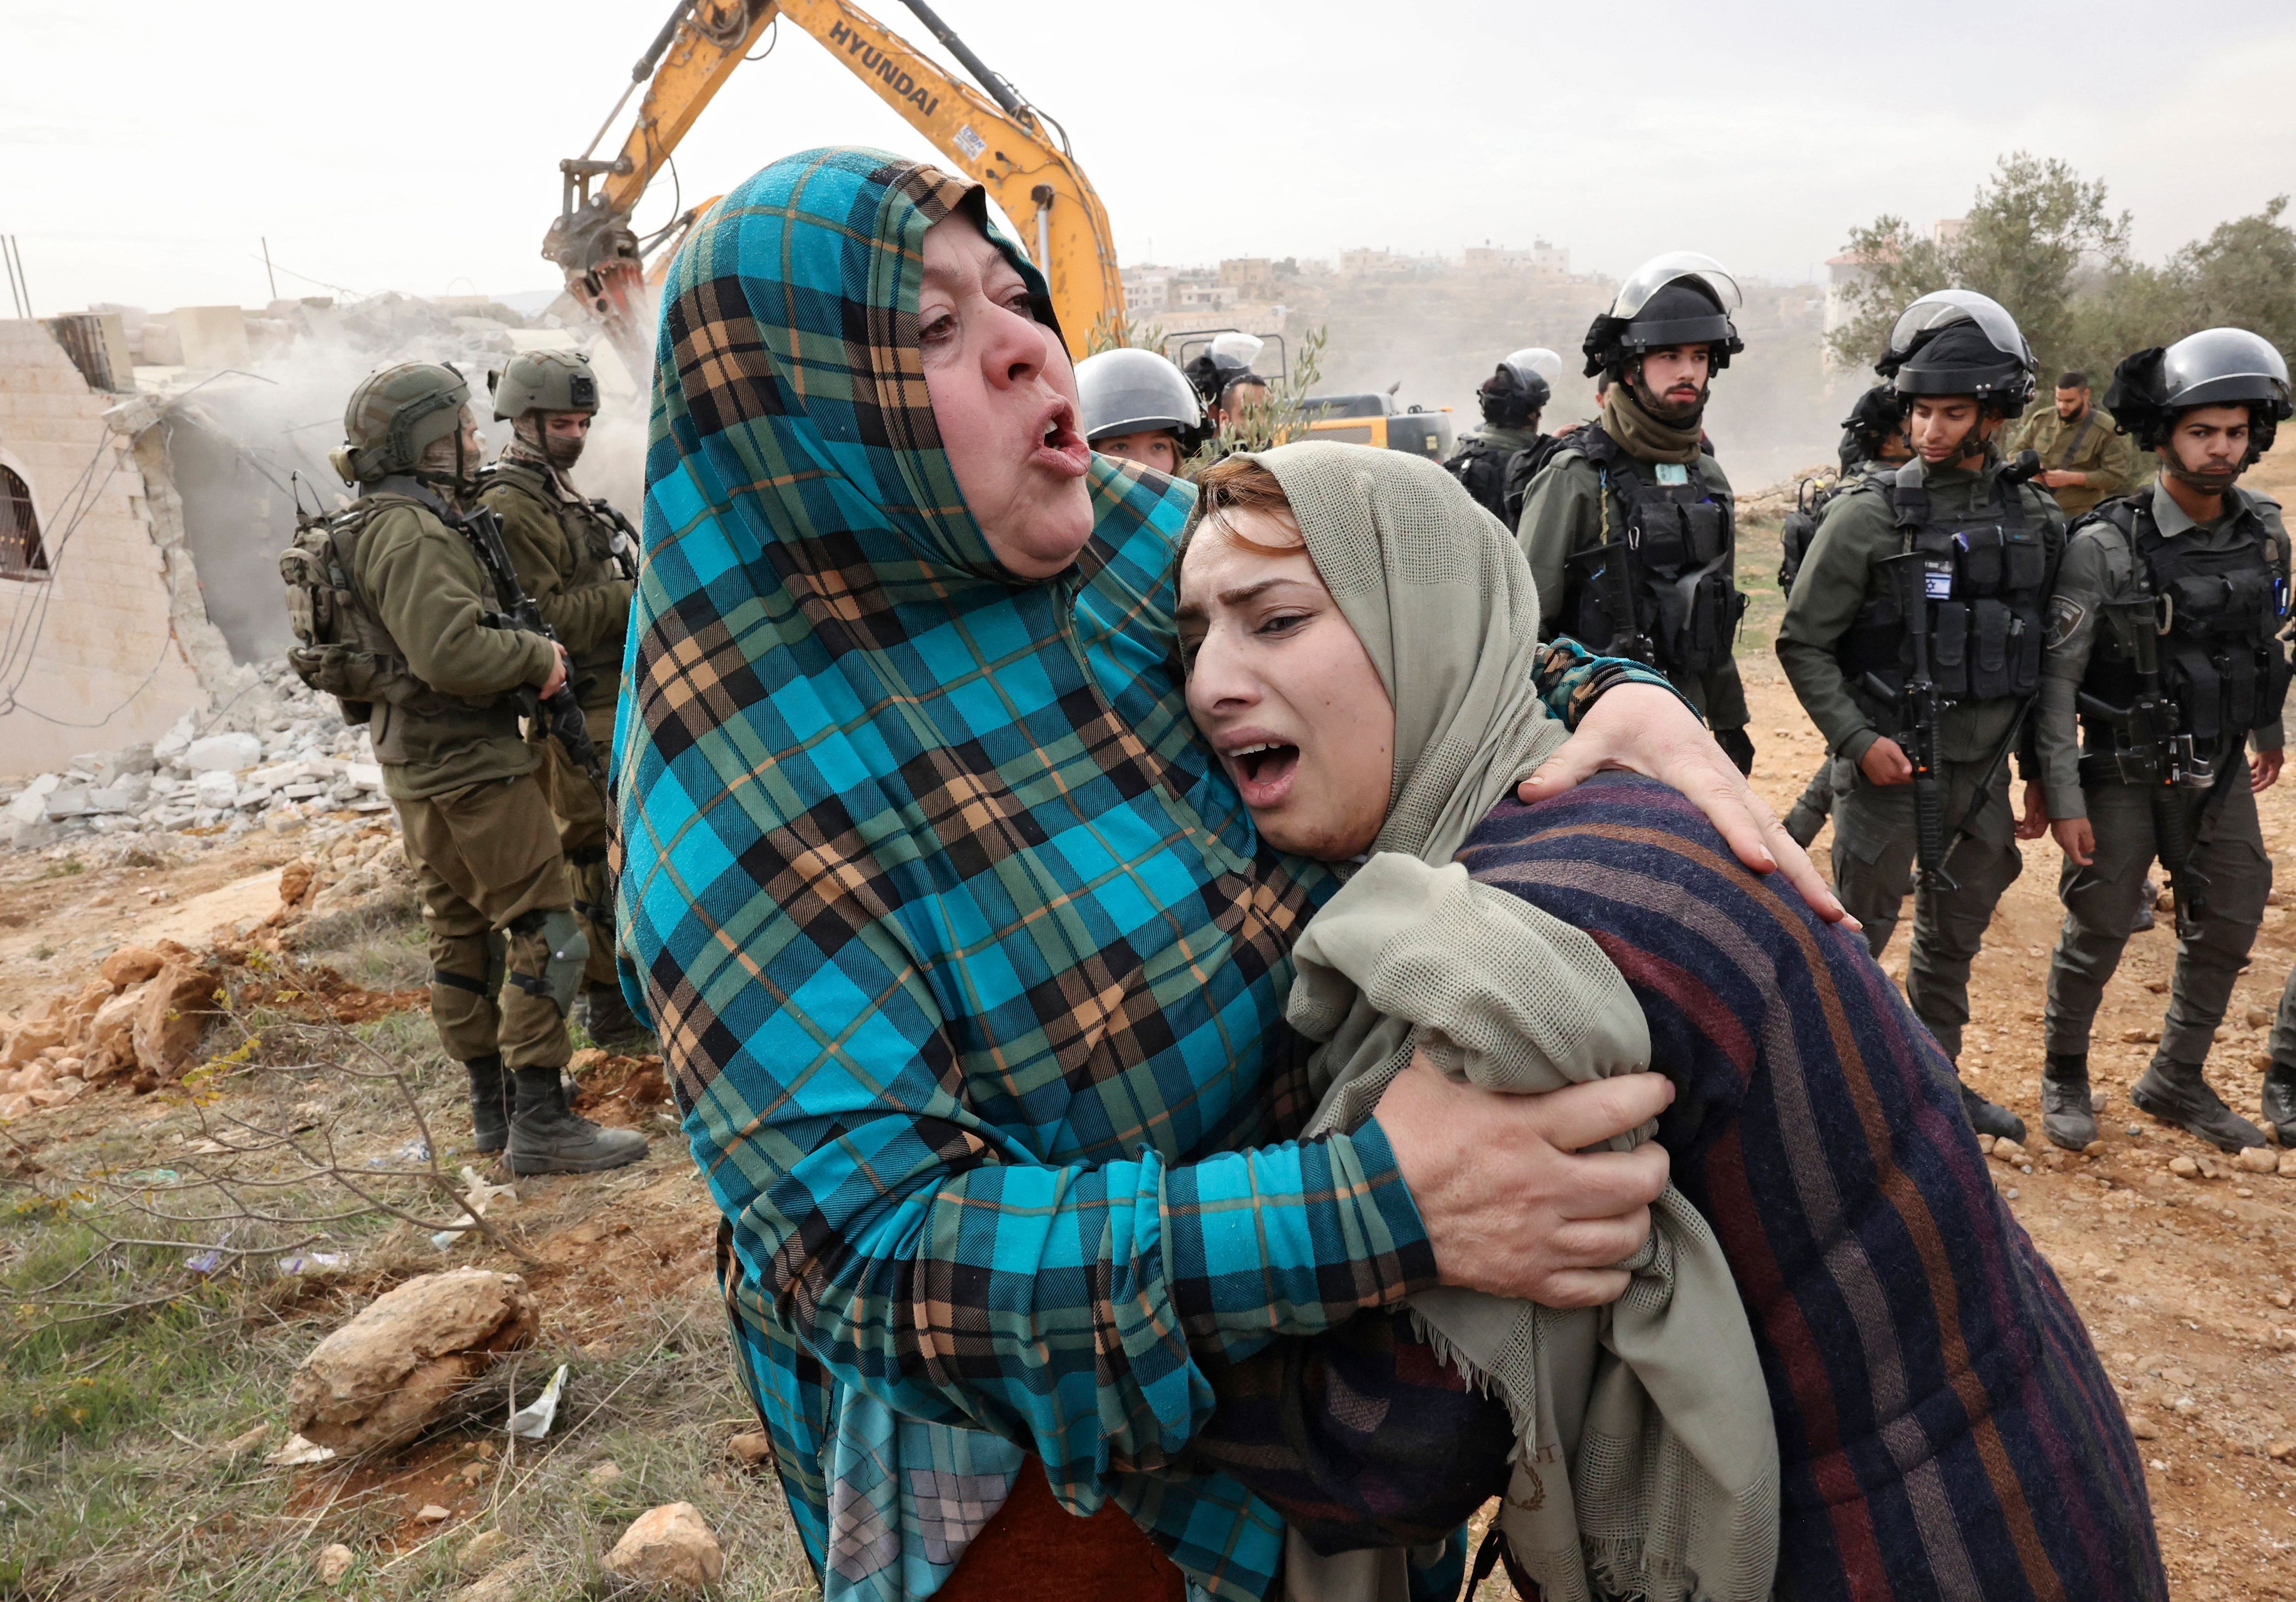 Israeli forces stand guard as Palestinian women react to the demolition of their home in the occupied West Bank town of Hebron on 28 December 2021